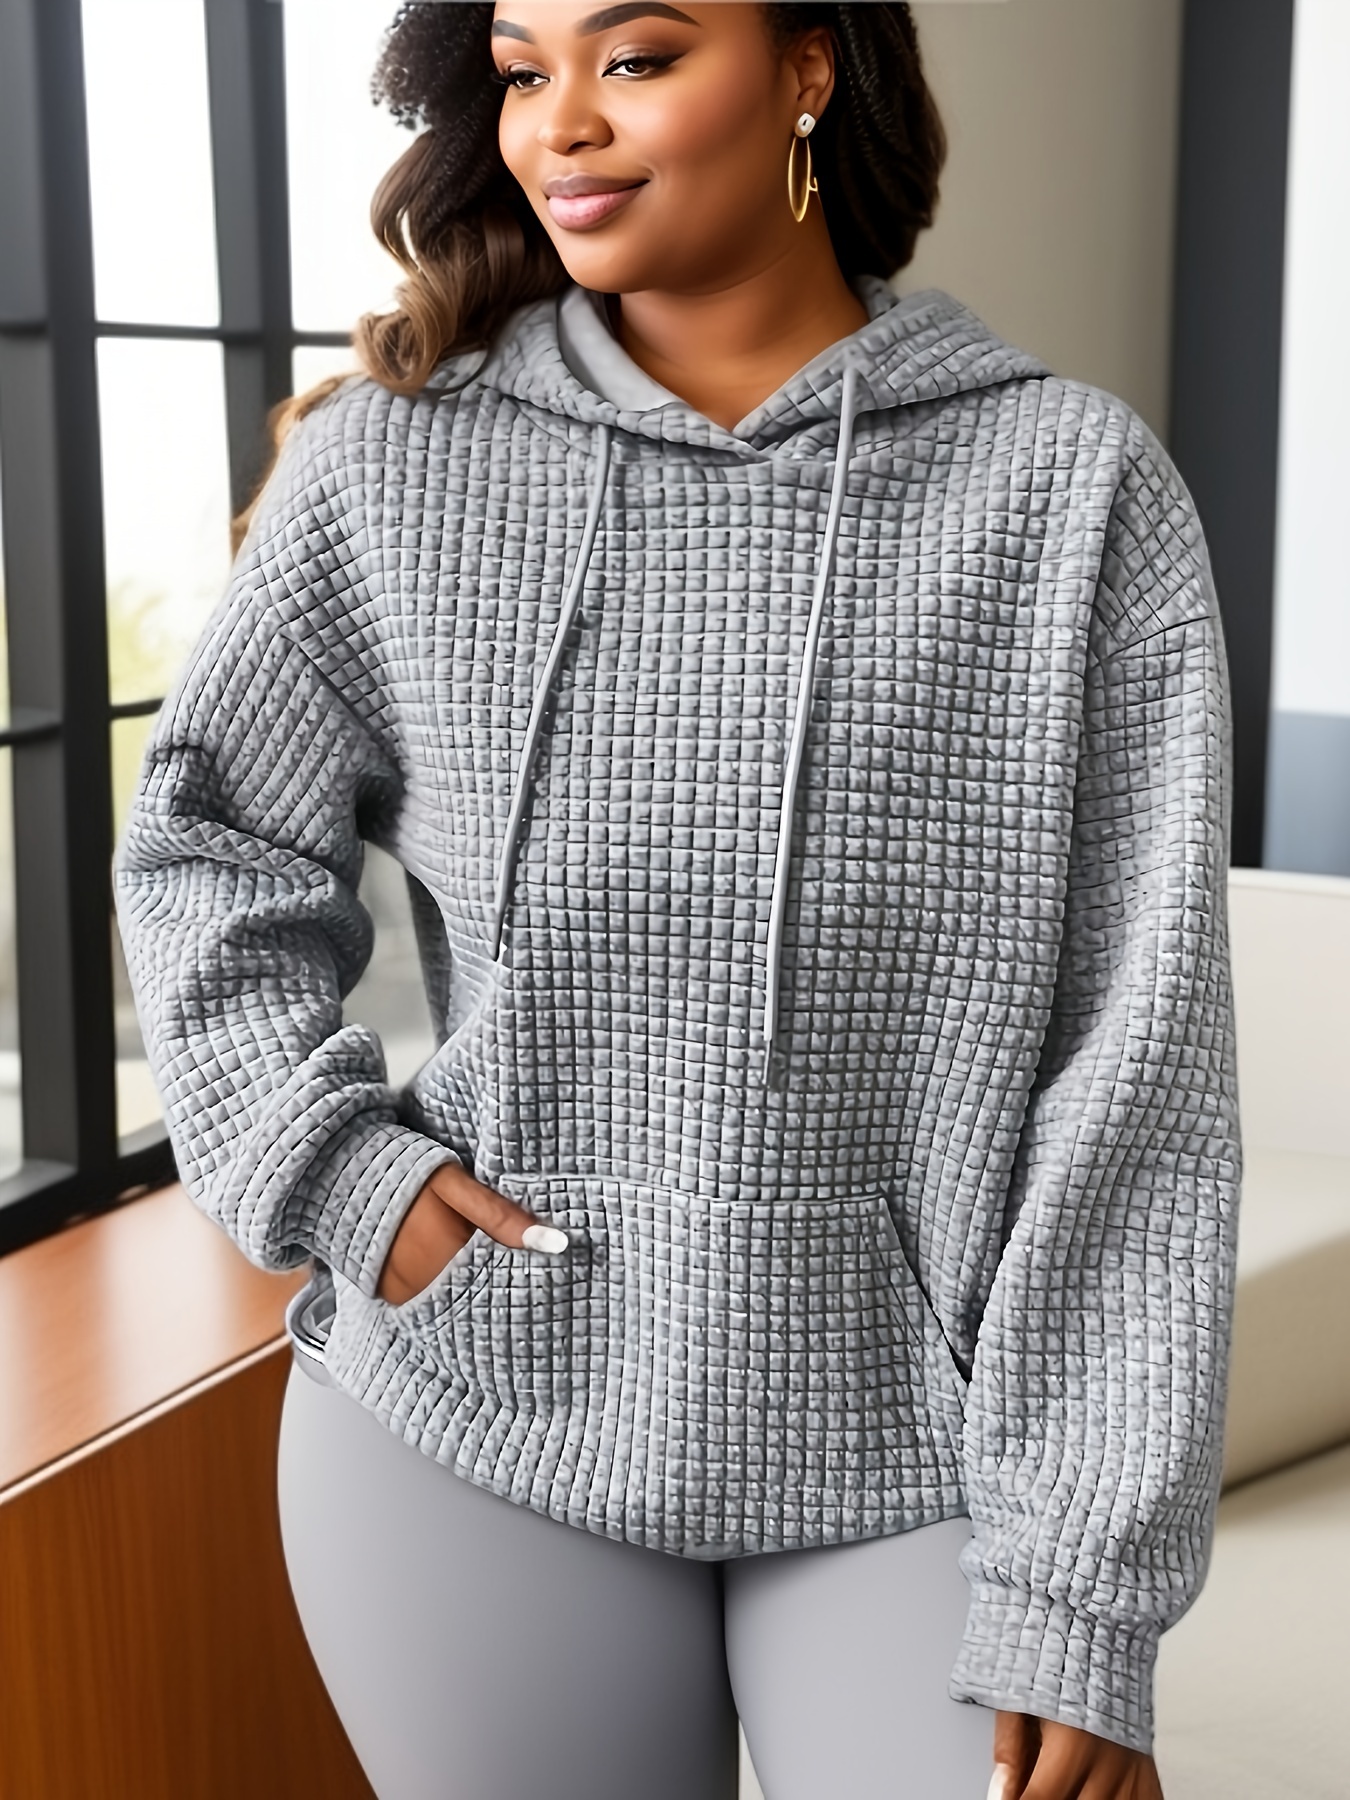 Long Hoodie for Women Casual Plus Size Hoodies Oversized Tunic